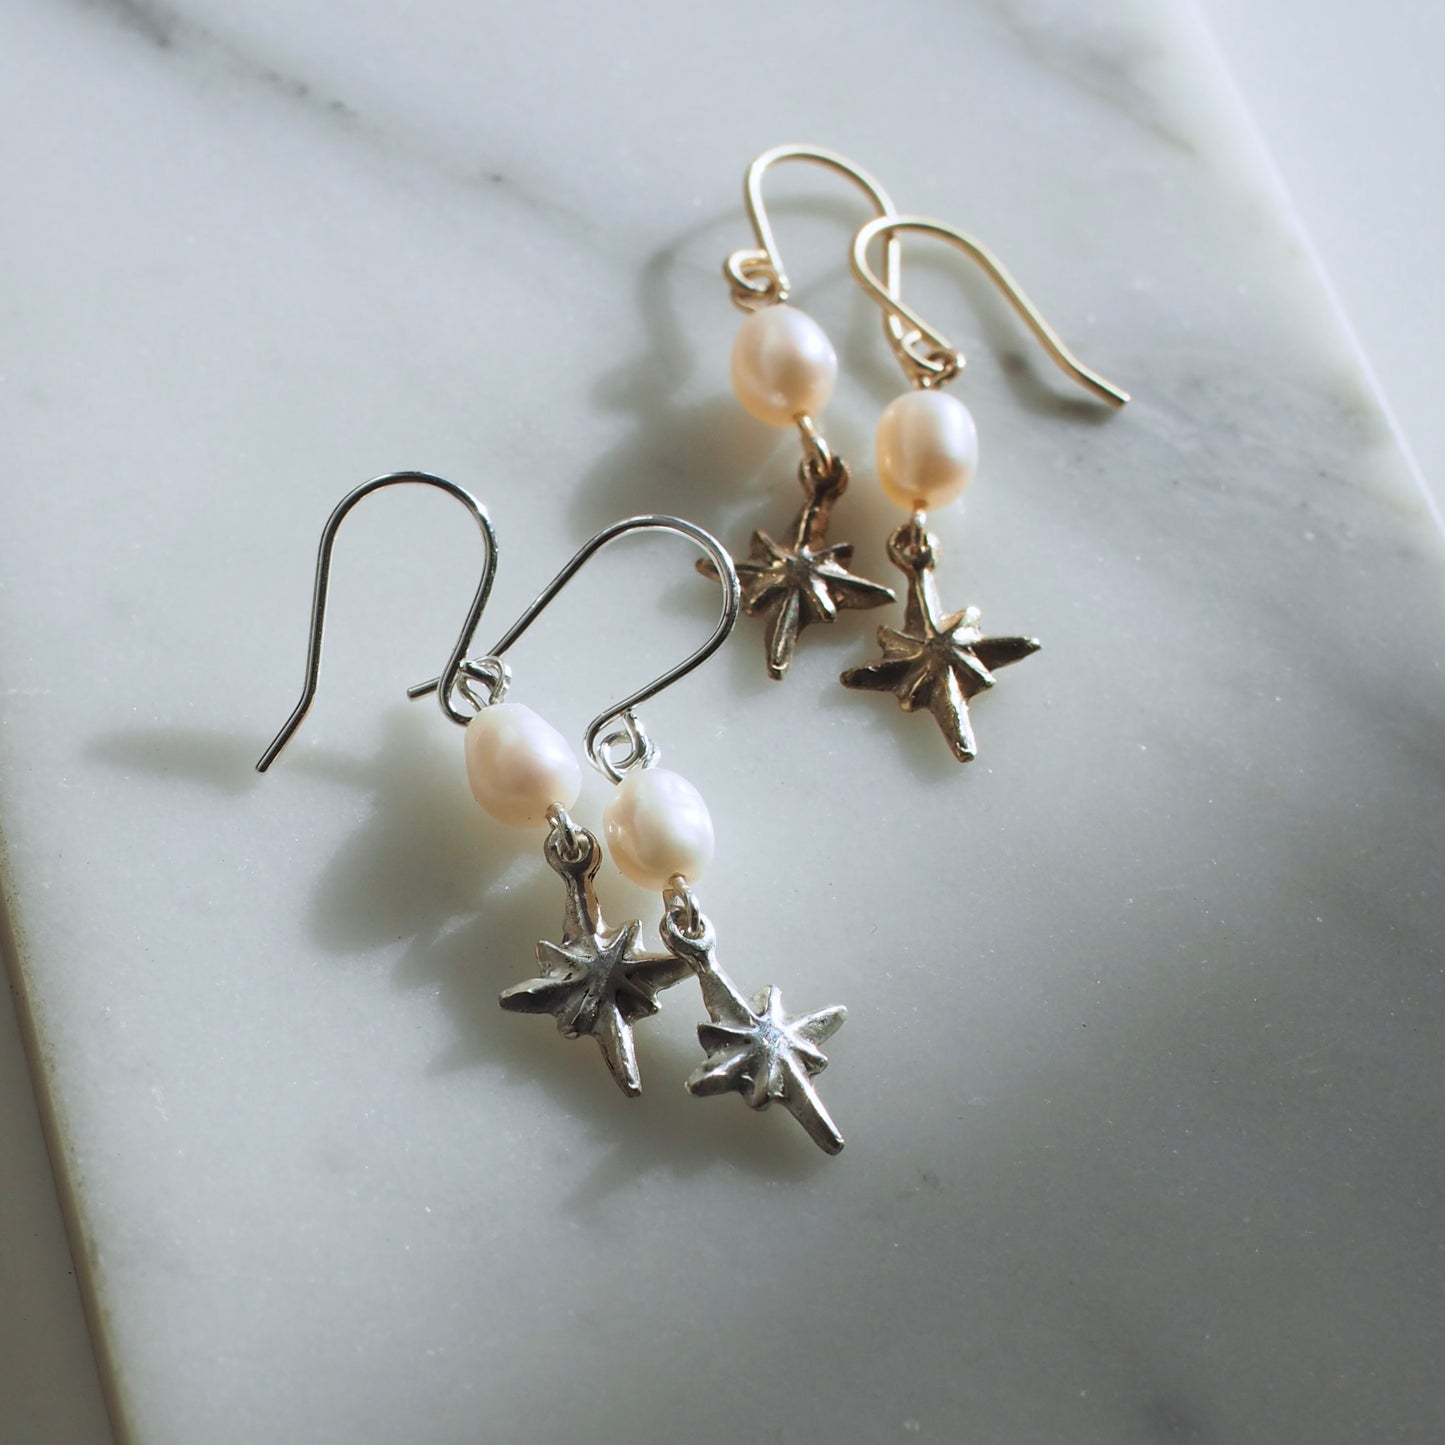 Dainty pearl and star earrings, featuring a 7mm oval shaped pearl with a tiny silver or bronze star hanging below it. 